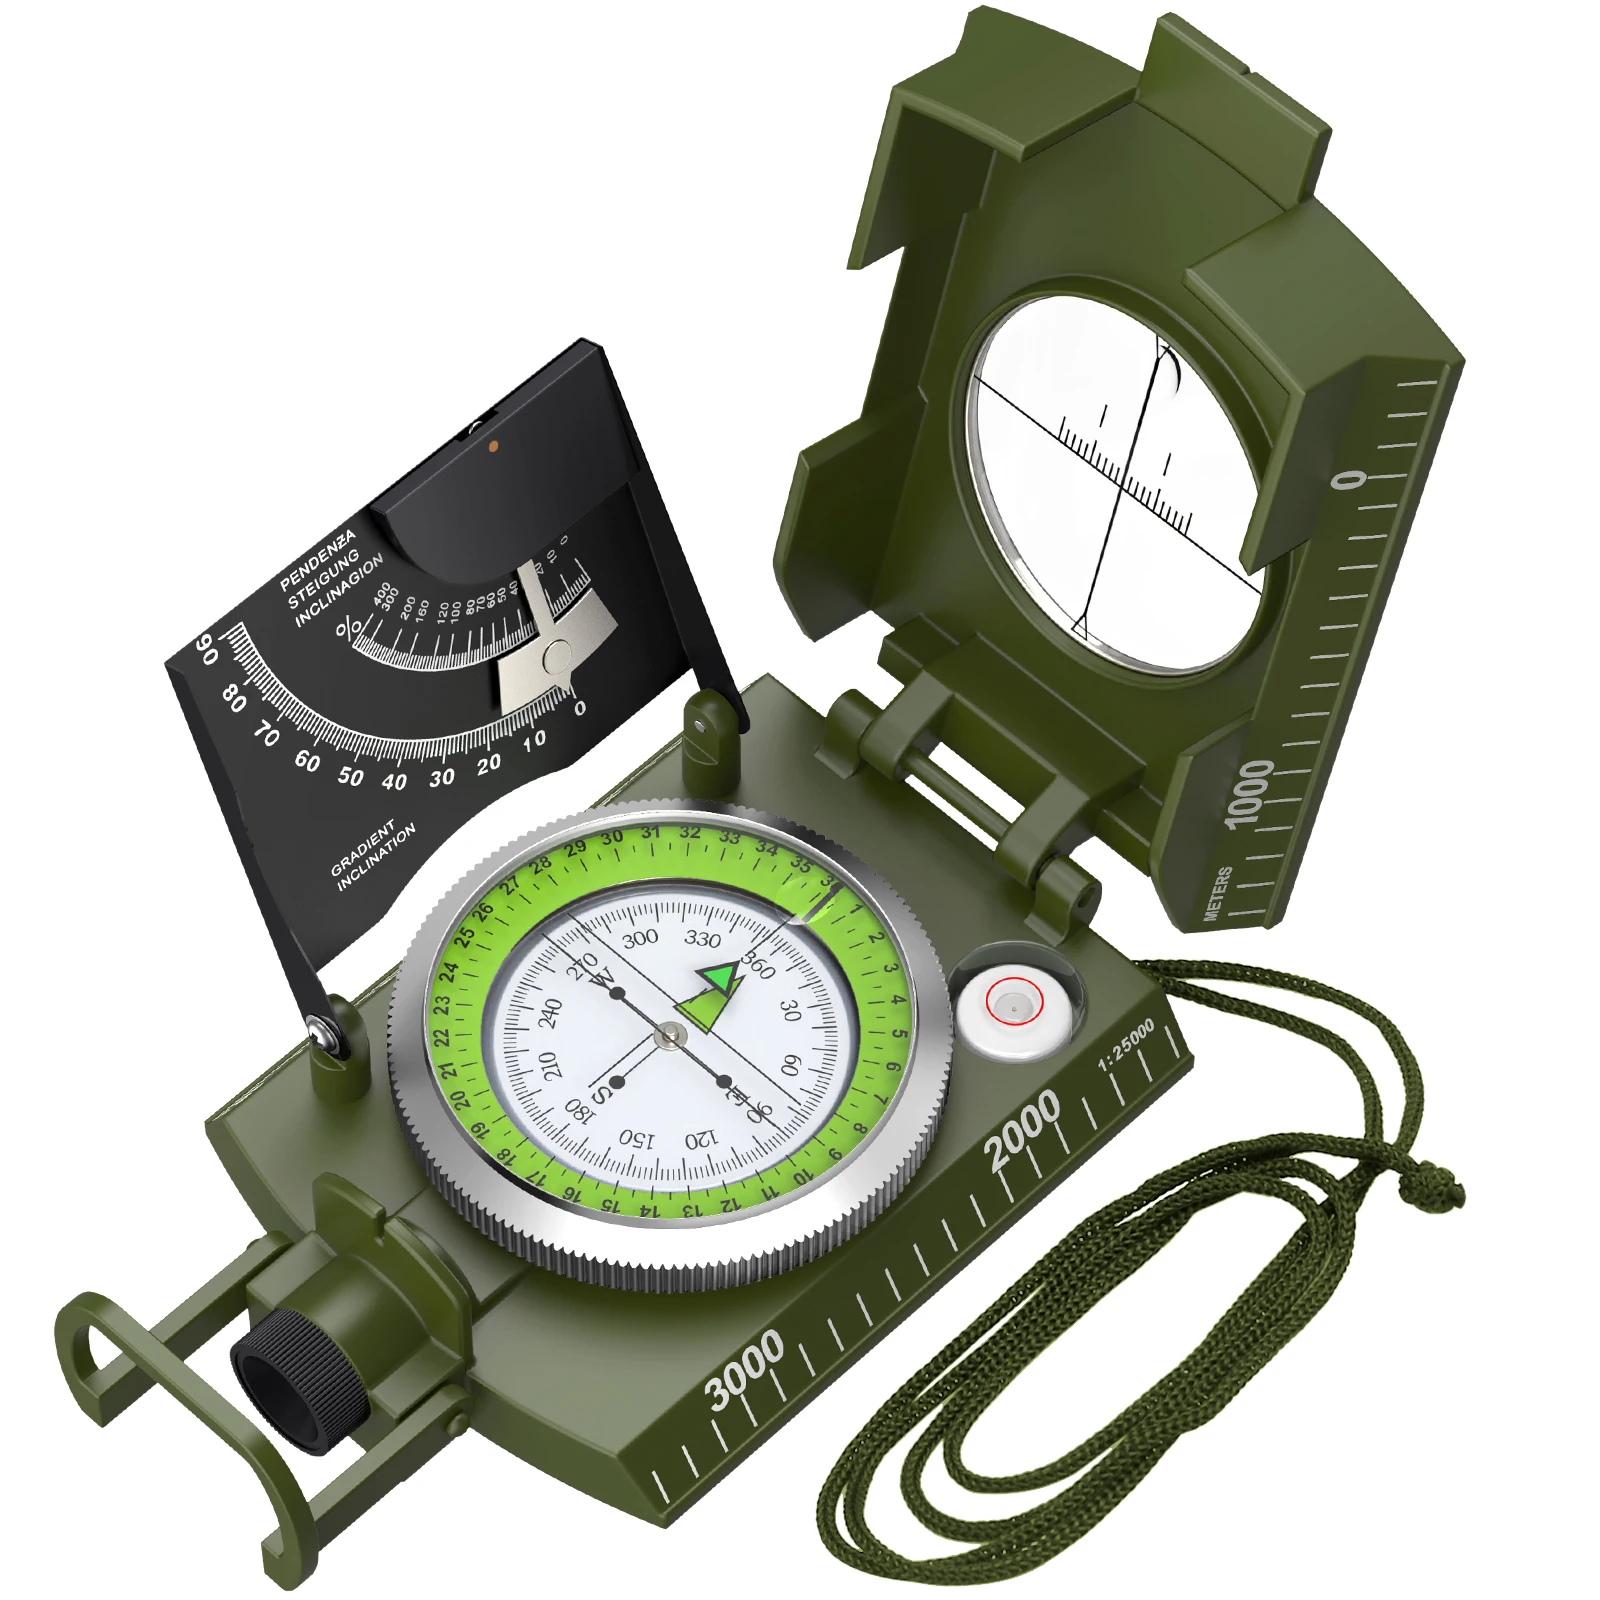 Compass Professional Sighting and Clinometer with Carry Bag 1